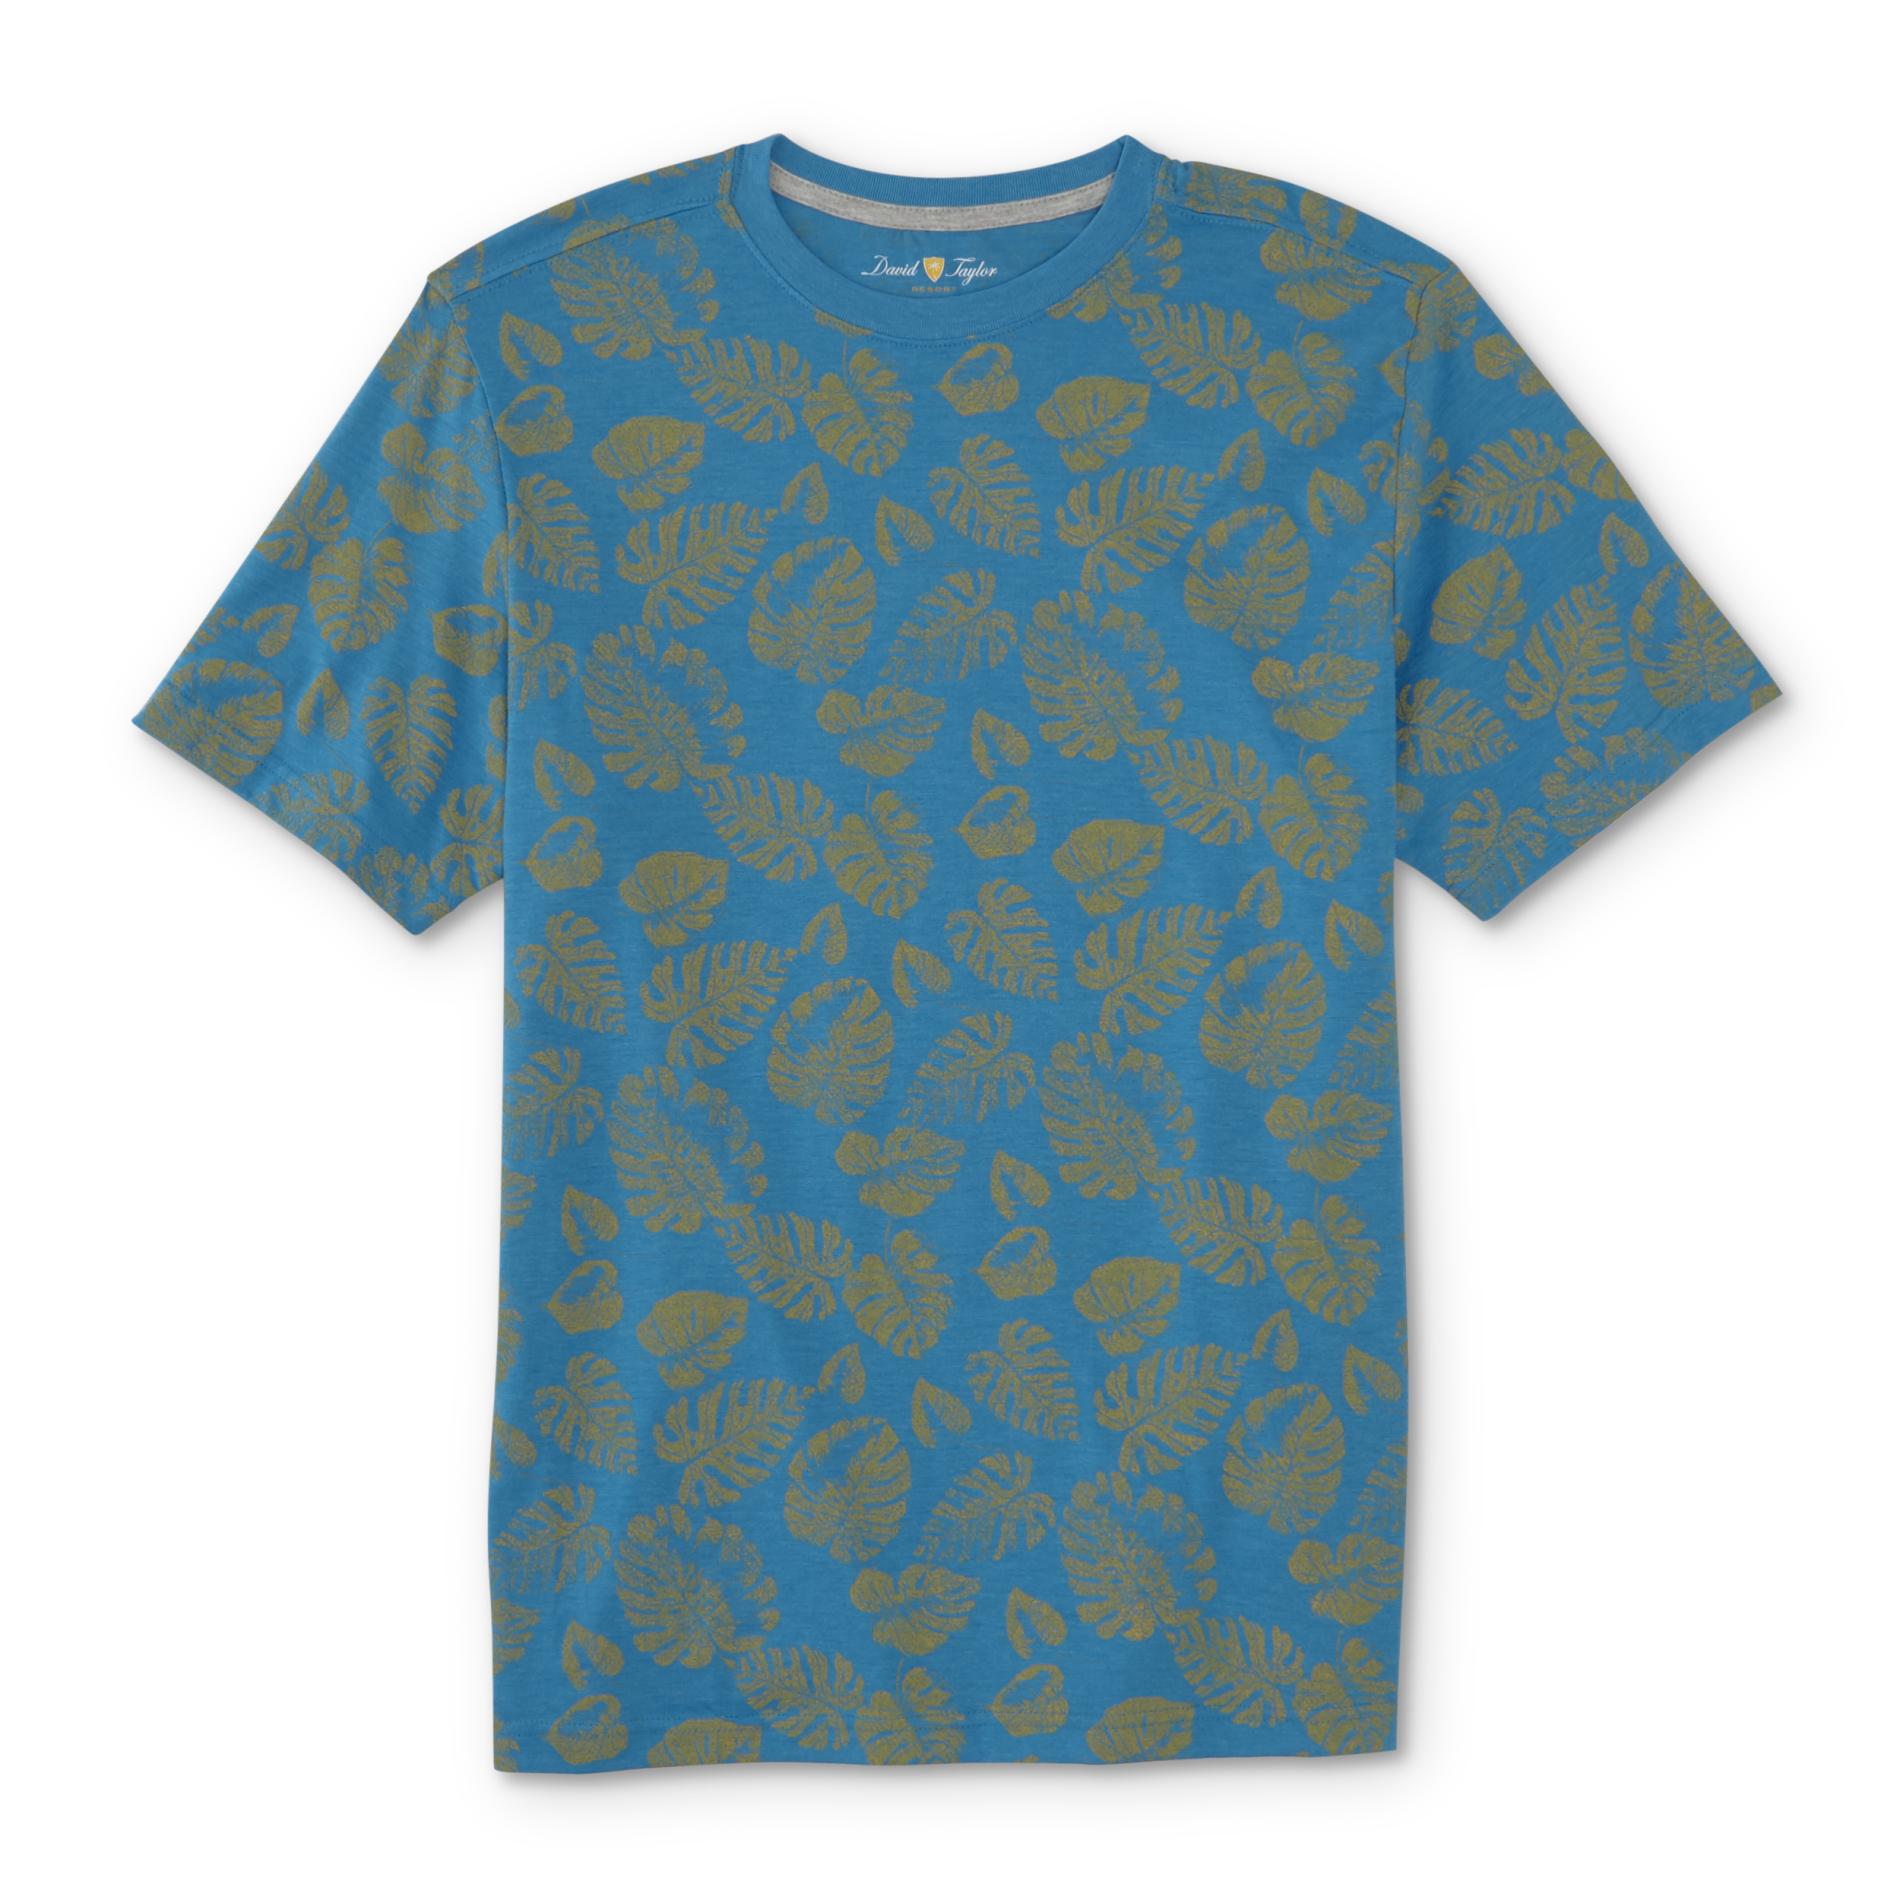 David Taylor Collection Men's Graphic T-Shirt - Leaves